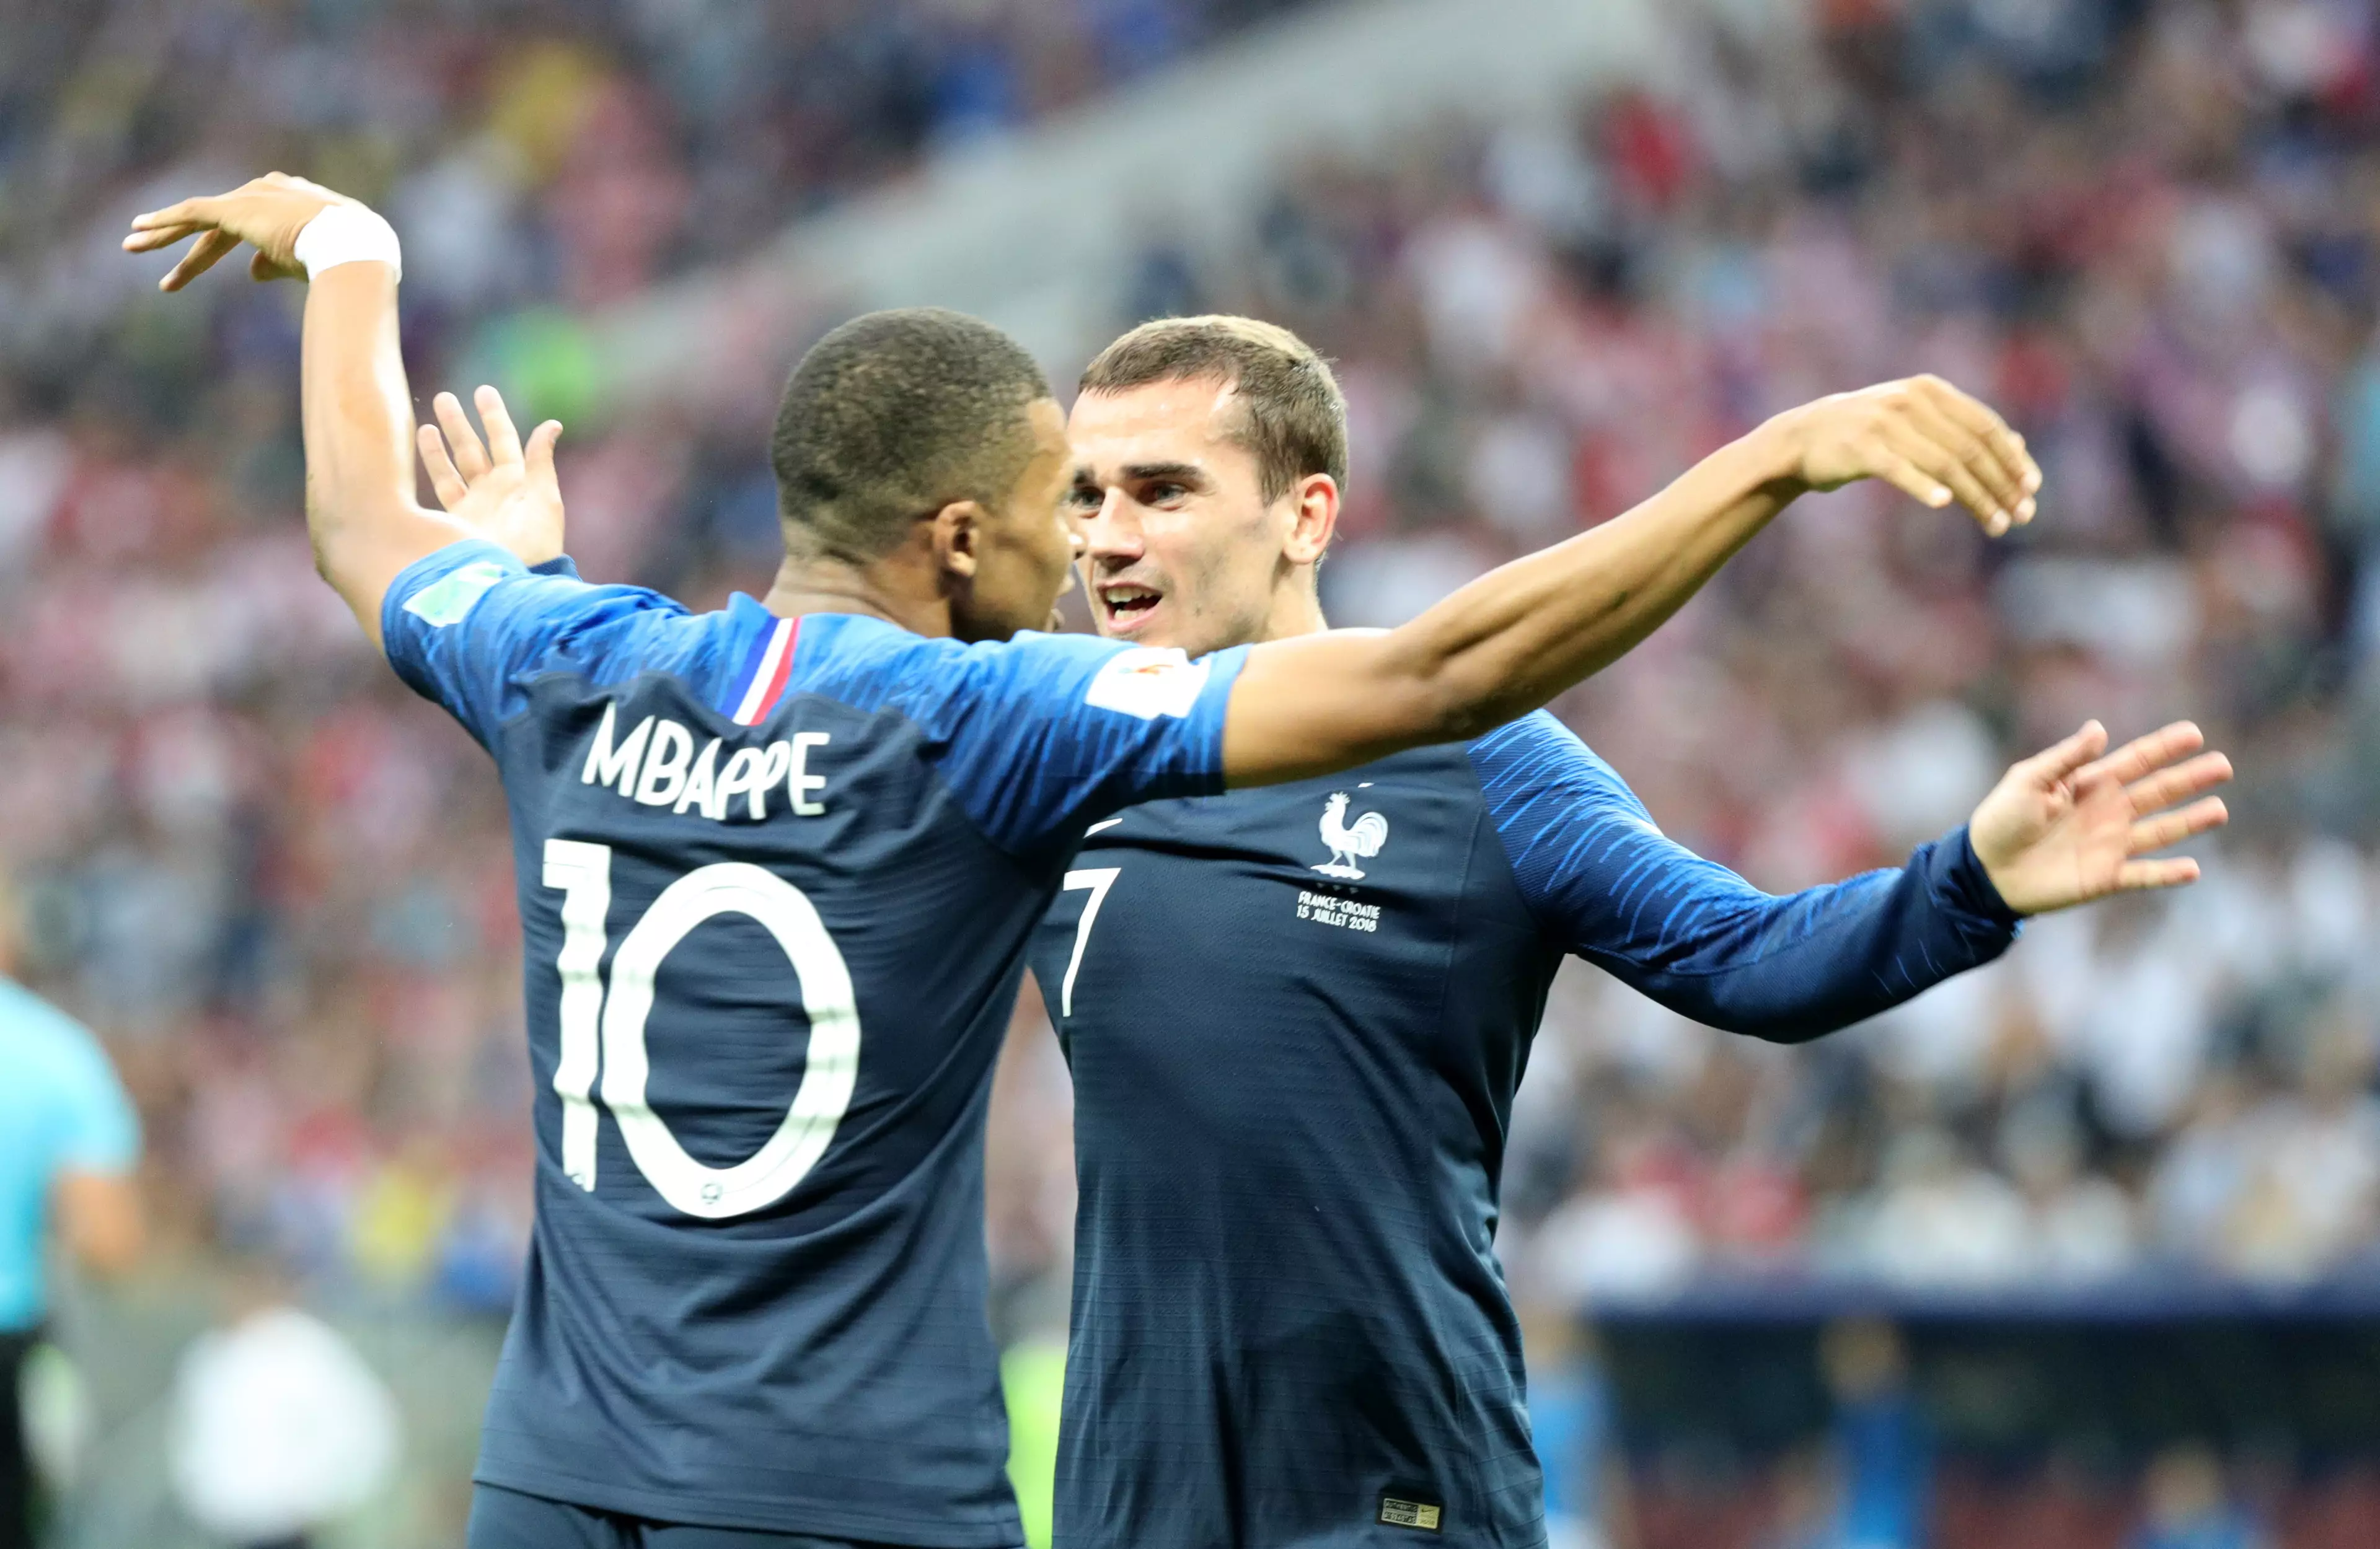 The two France players would surely be very pleased. Image: PA Images